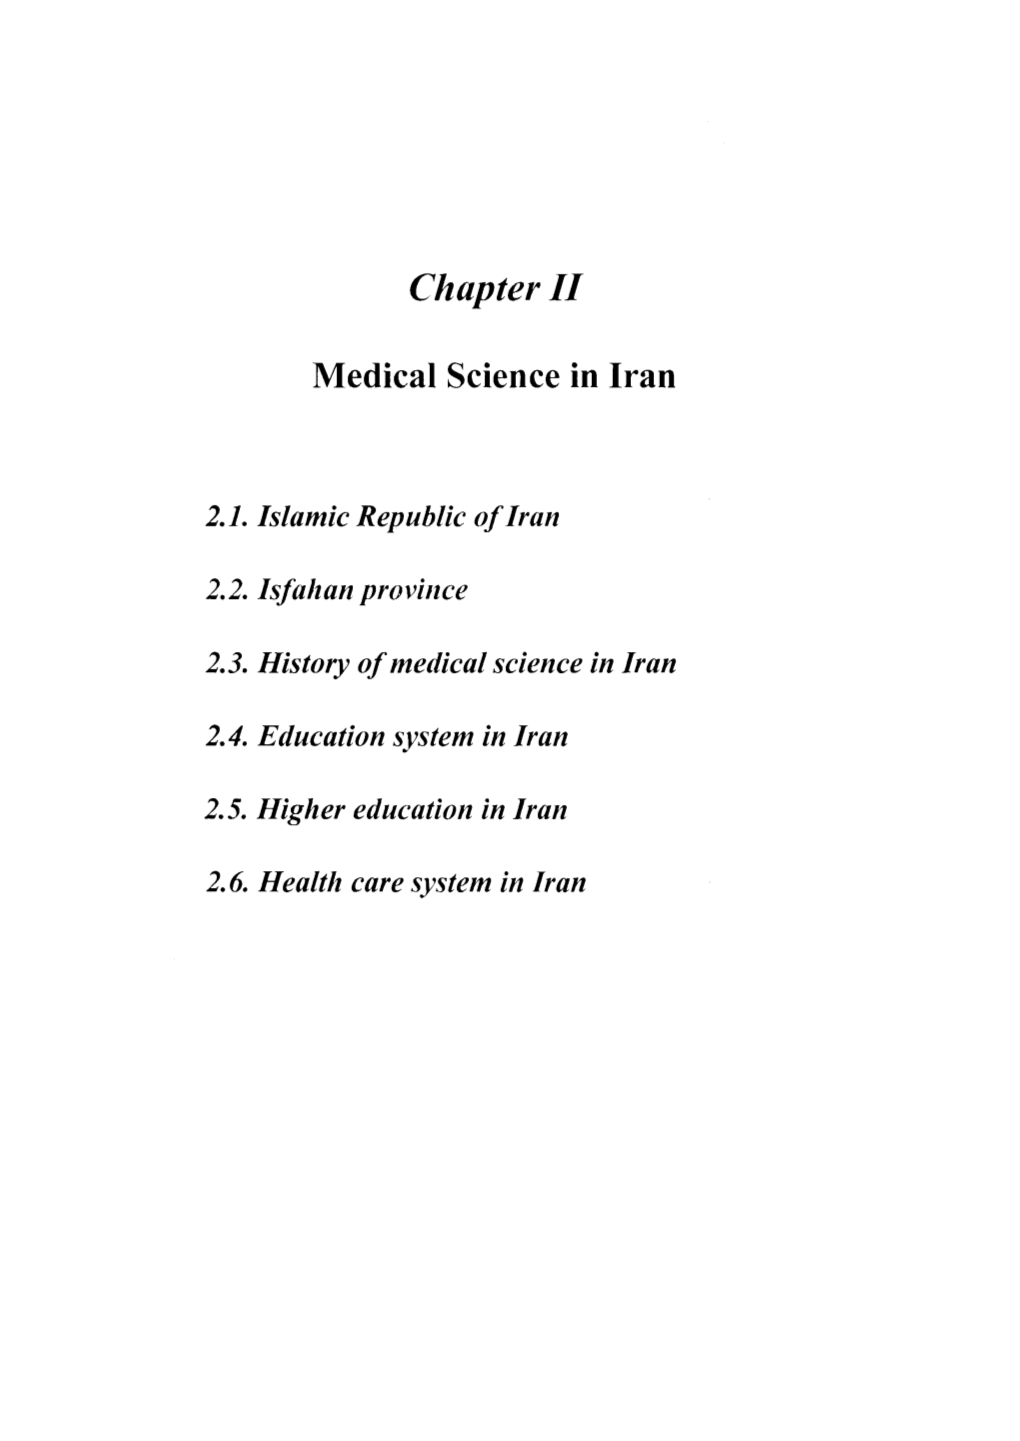 Chapter II Medical Science in Iran